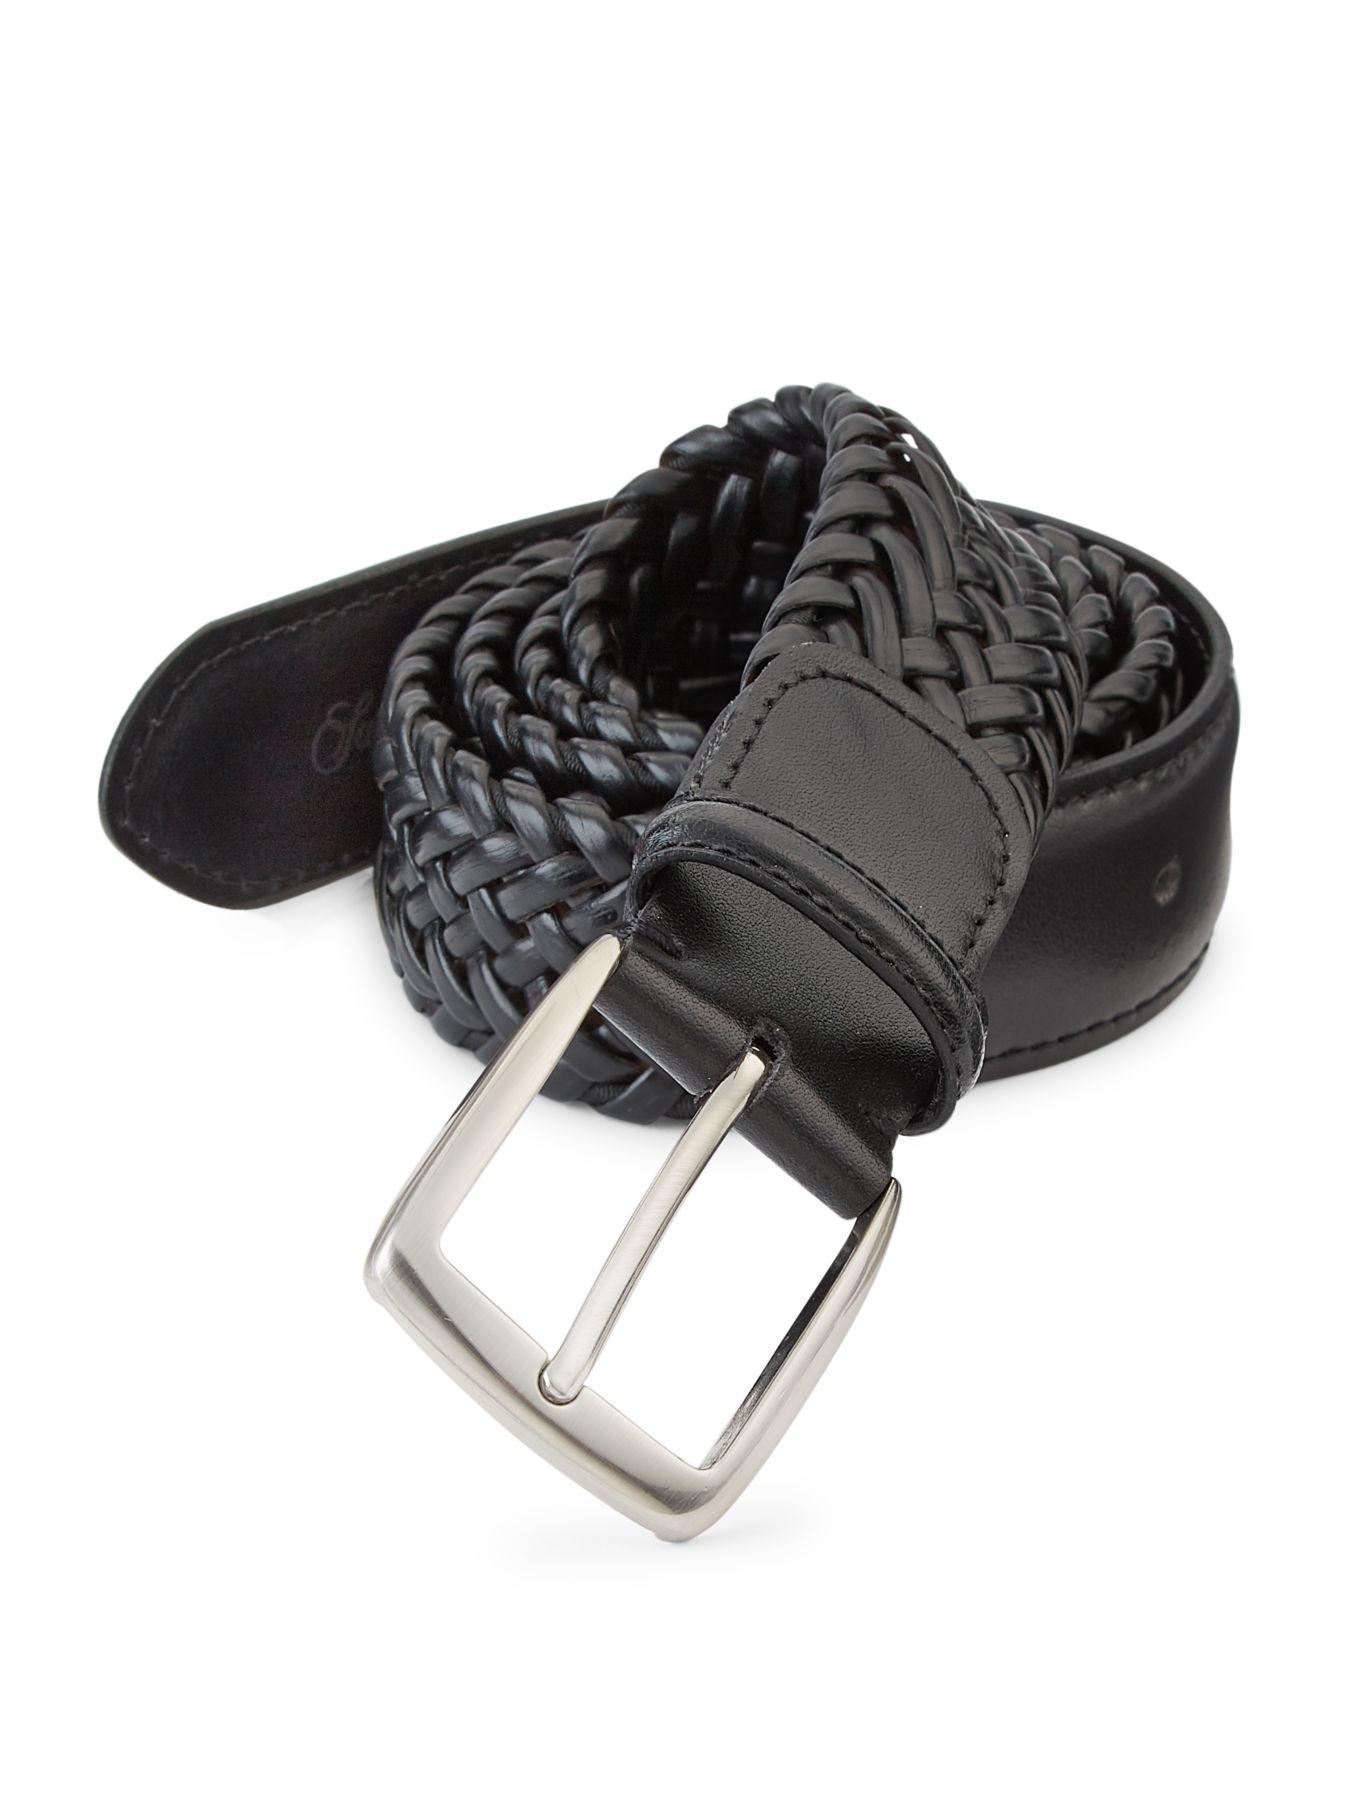 Saks Fifth Avenue Collection Braided Burnished Leather Belt in Black for Men - Lyst